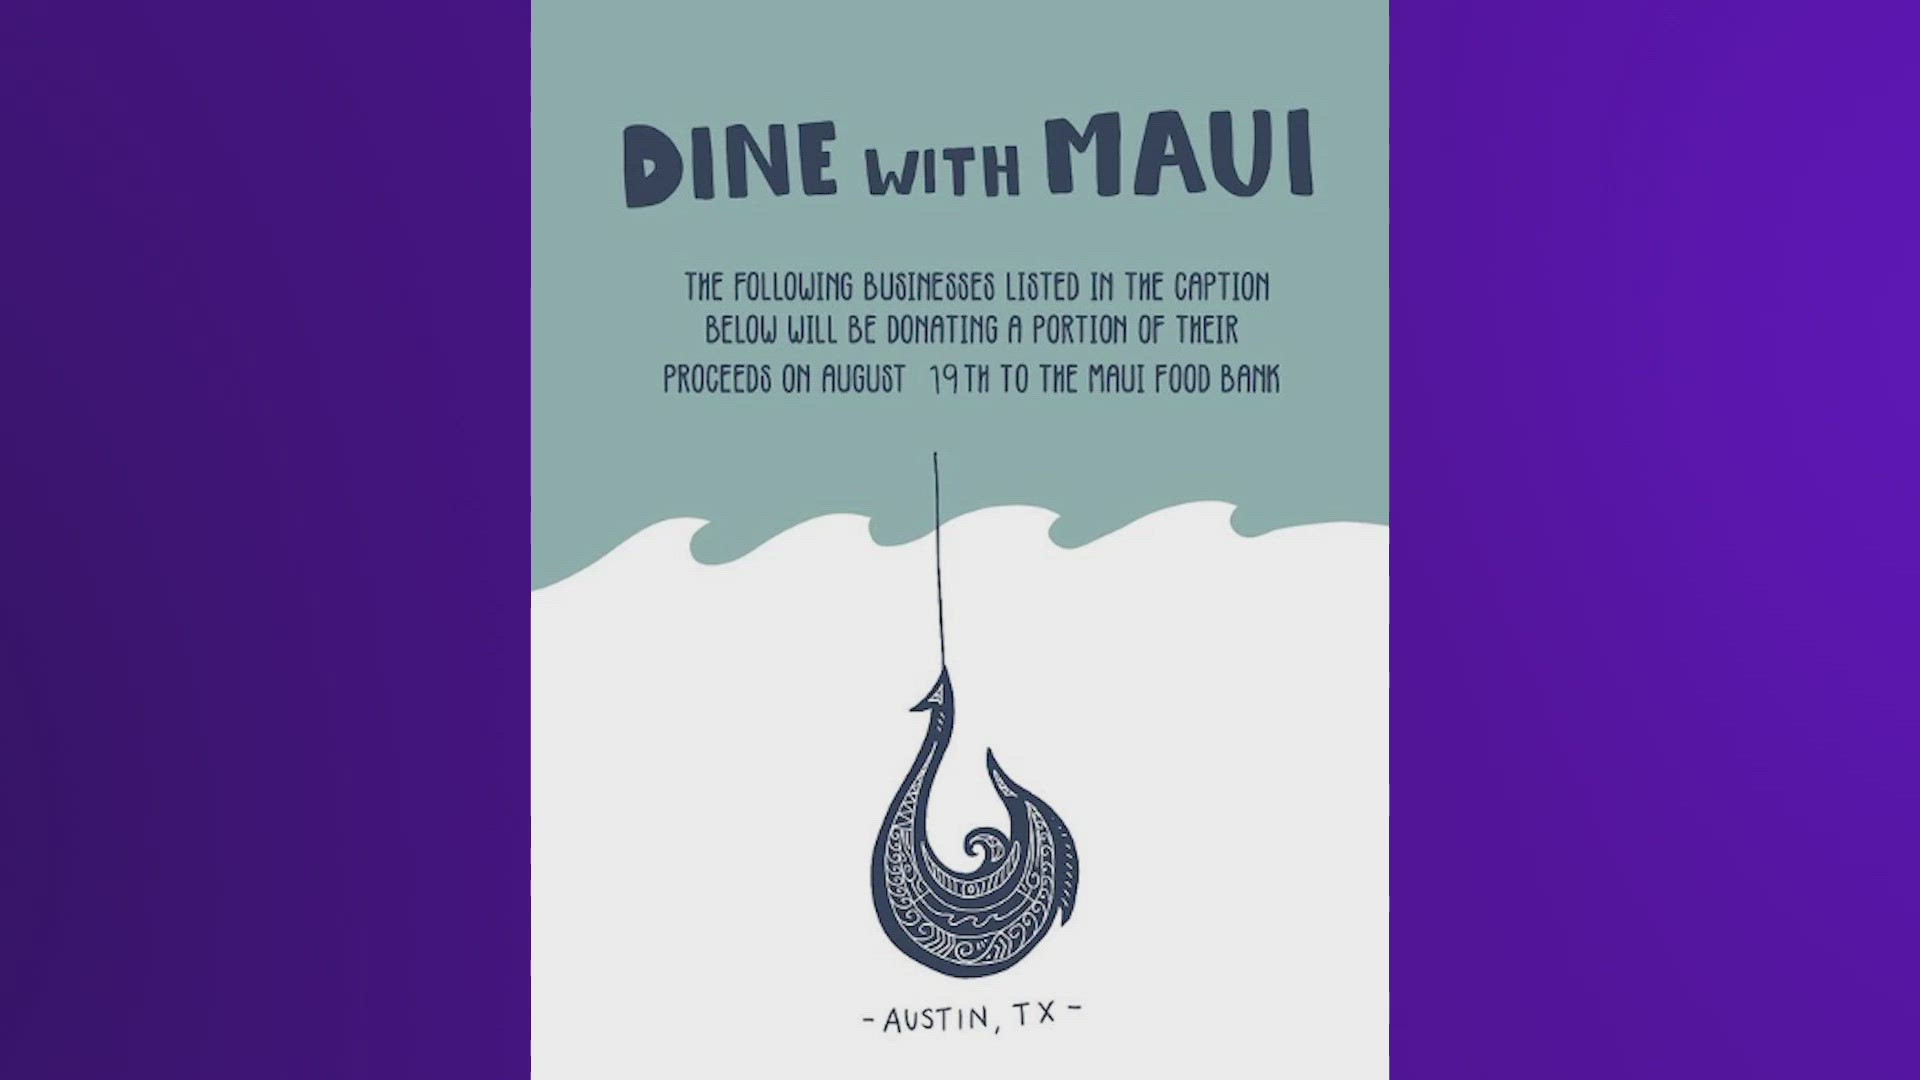 Thirty-three businesses will donate 10% of their sales, while three others will donate 5% to the Maui Food Bank.